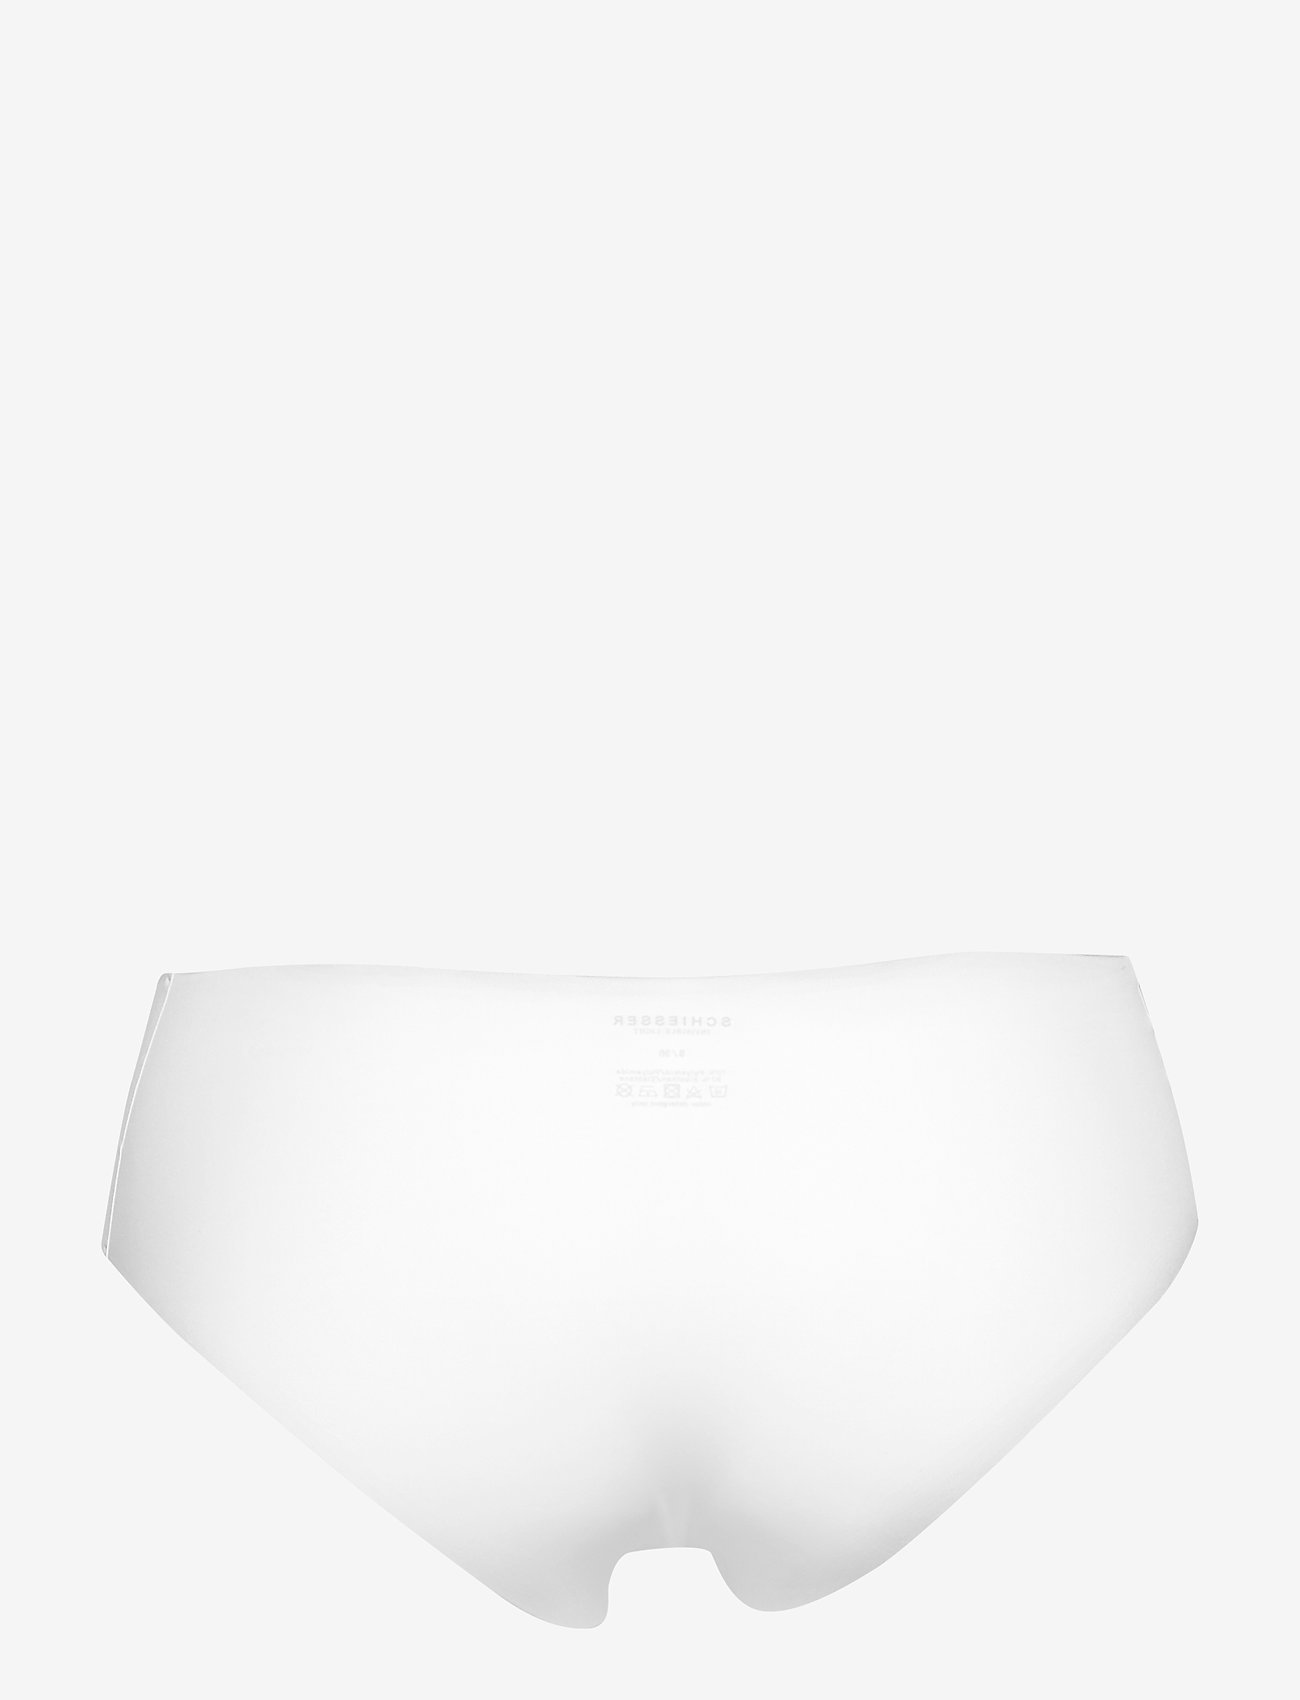 Schiesser - Panty - culottes sans couture - white - 1